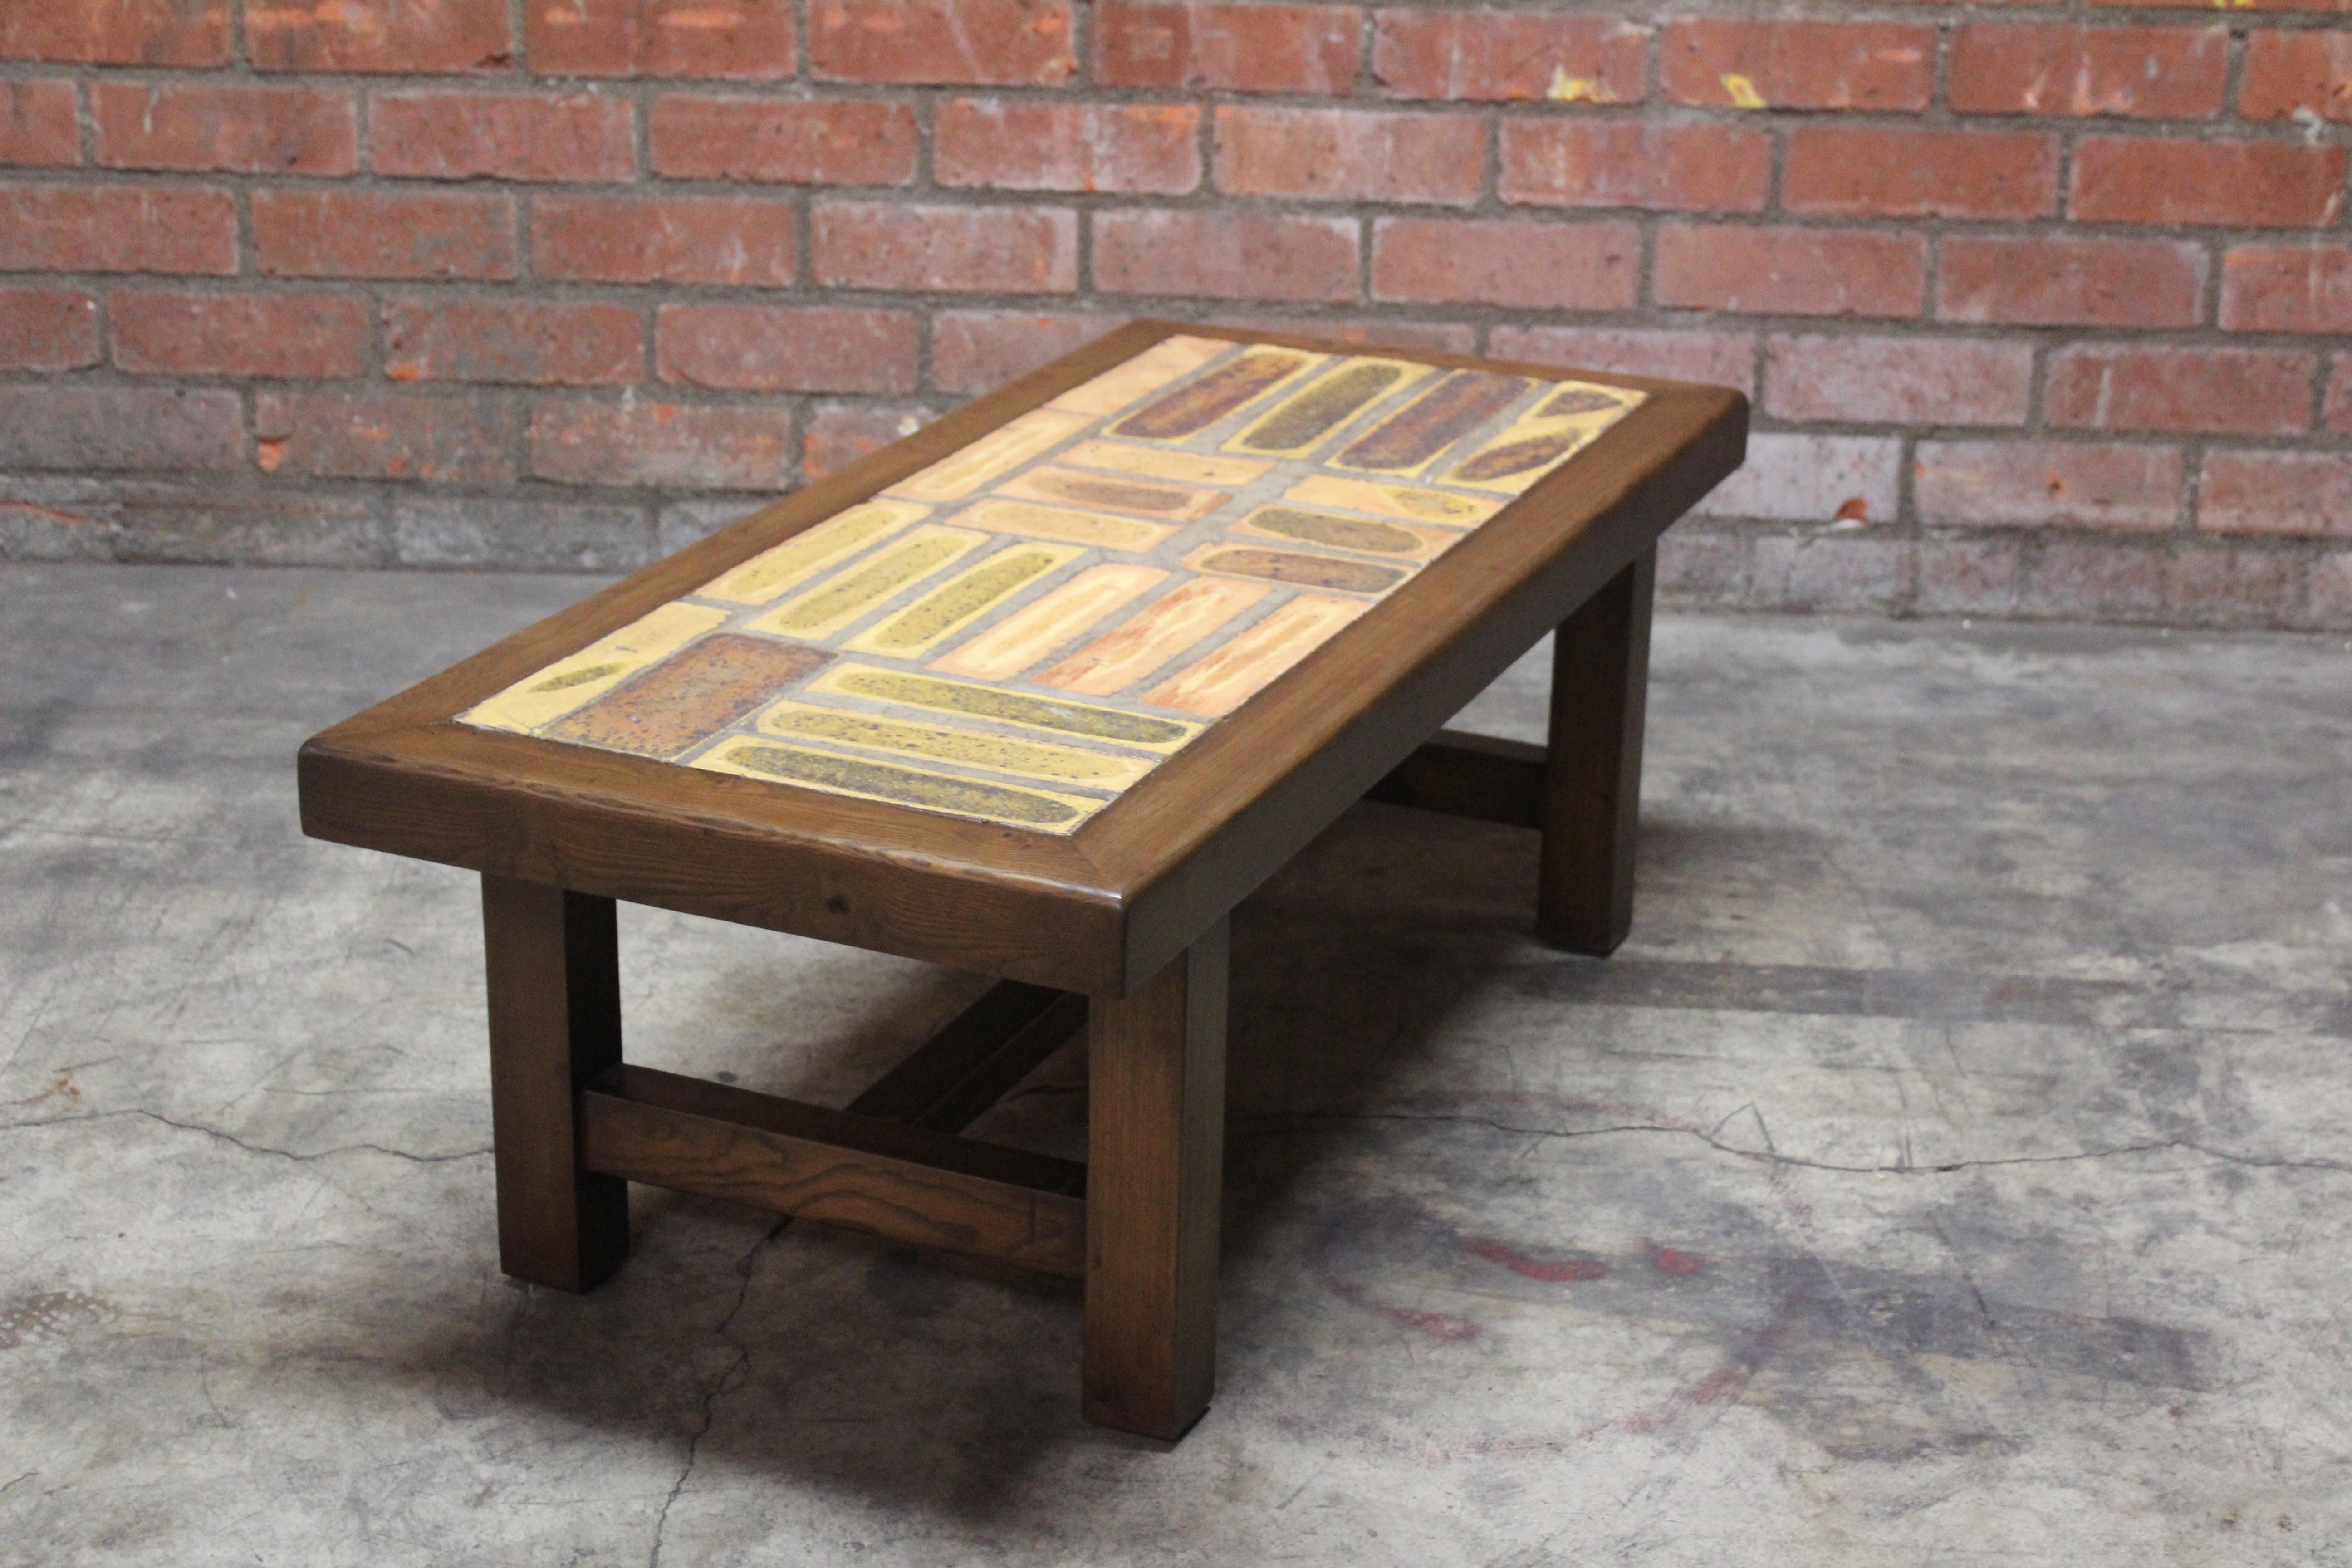 1960s French Modernist Ceramic Tile and Walnut Coffee Table 5